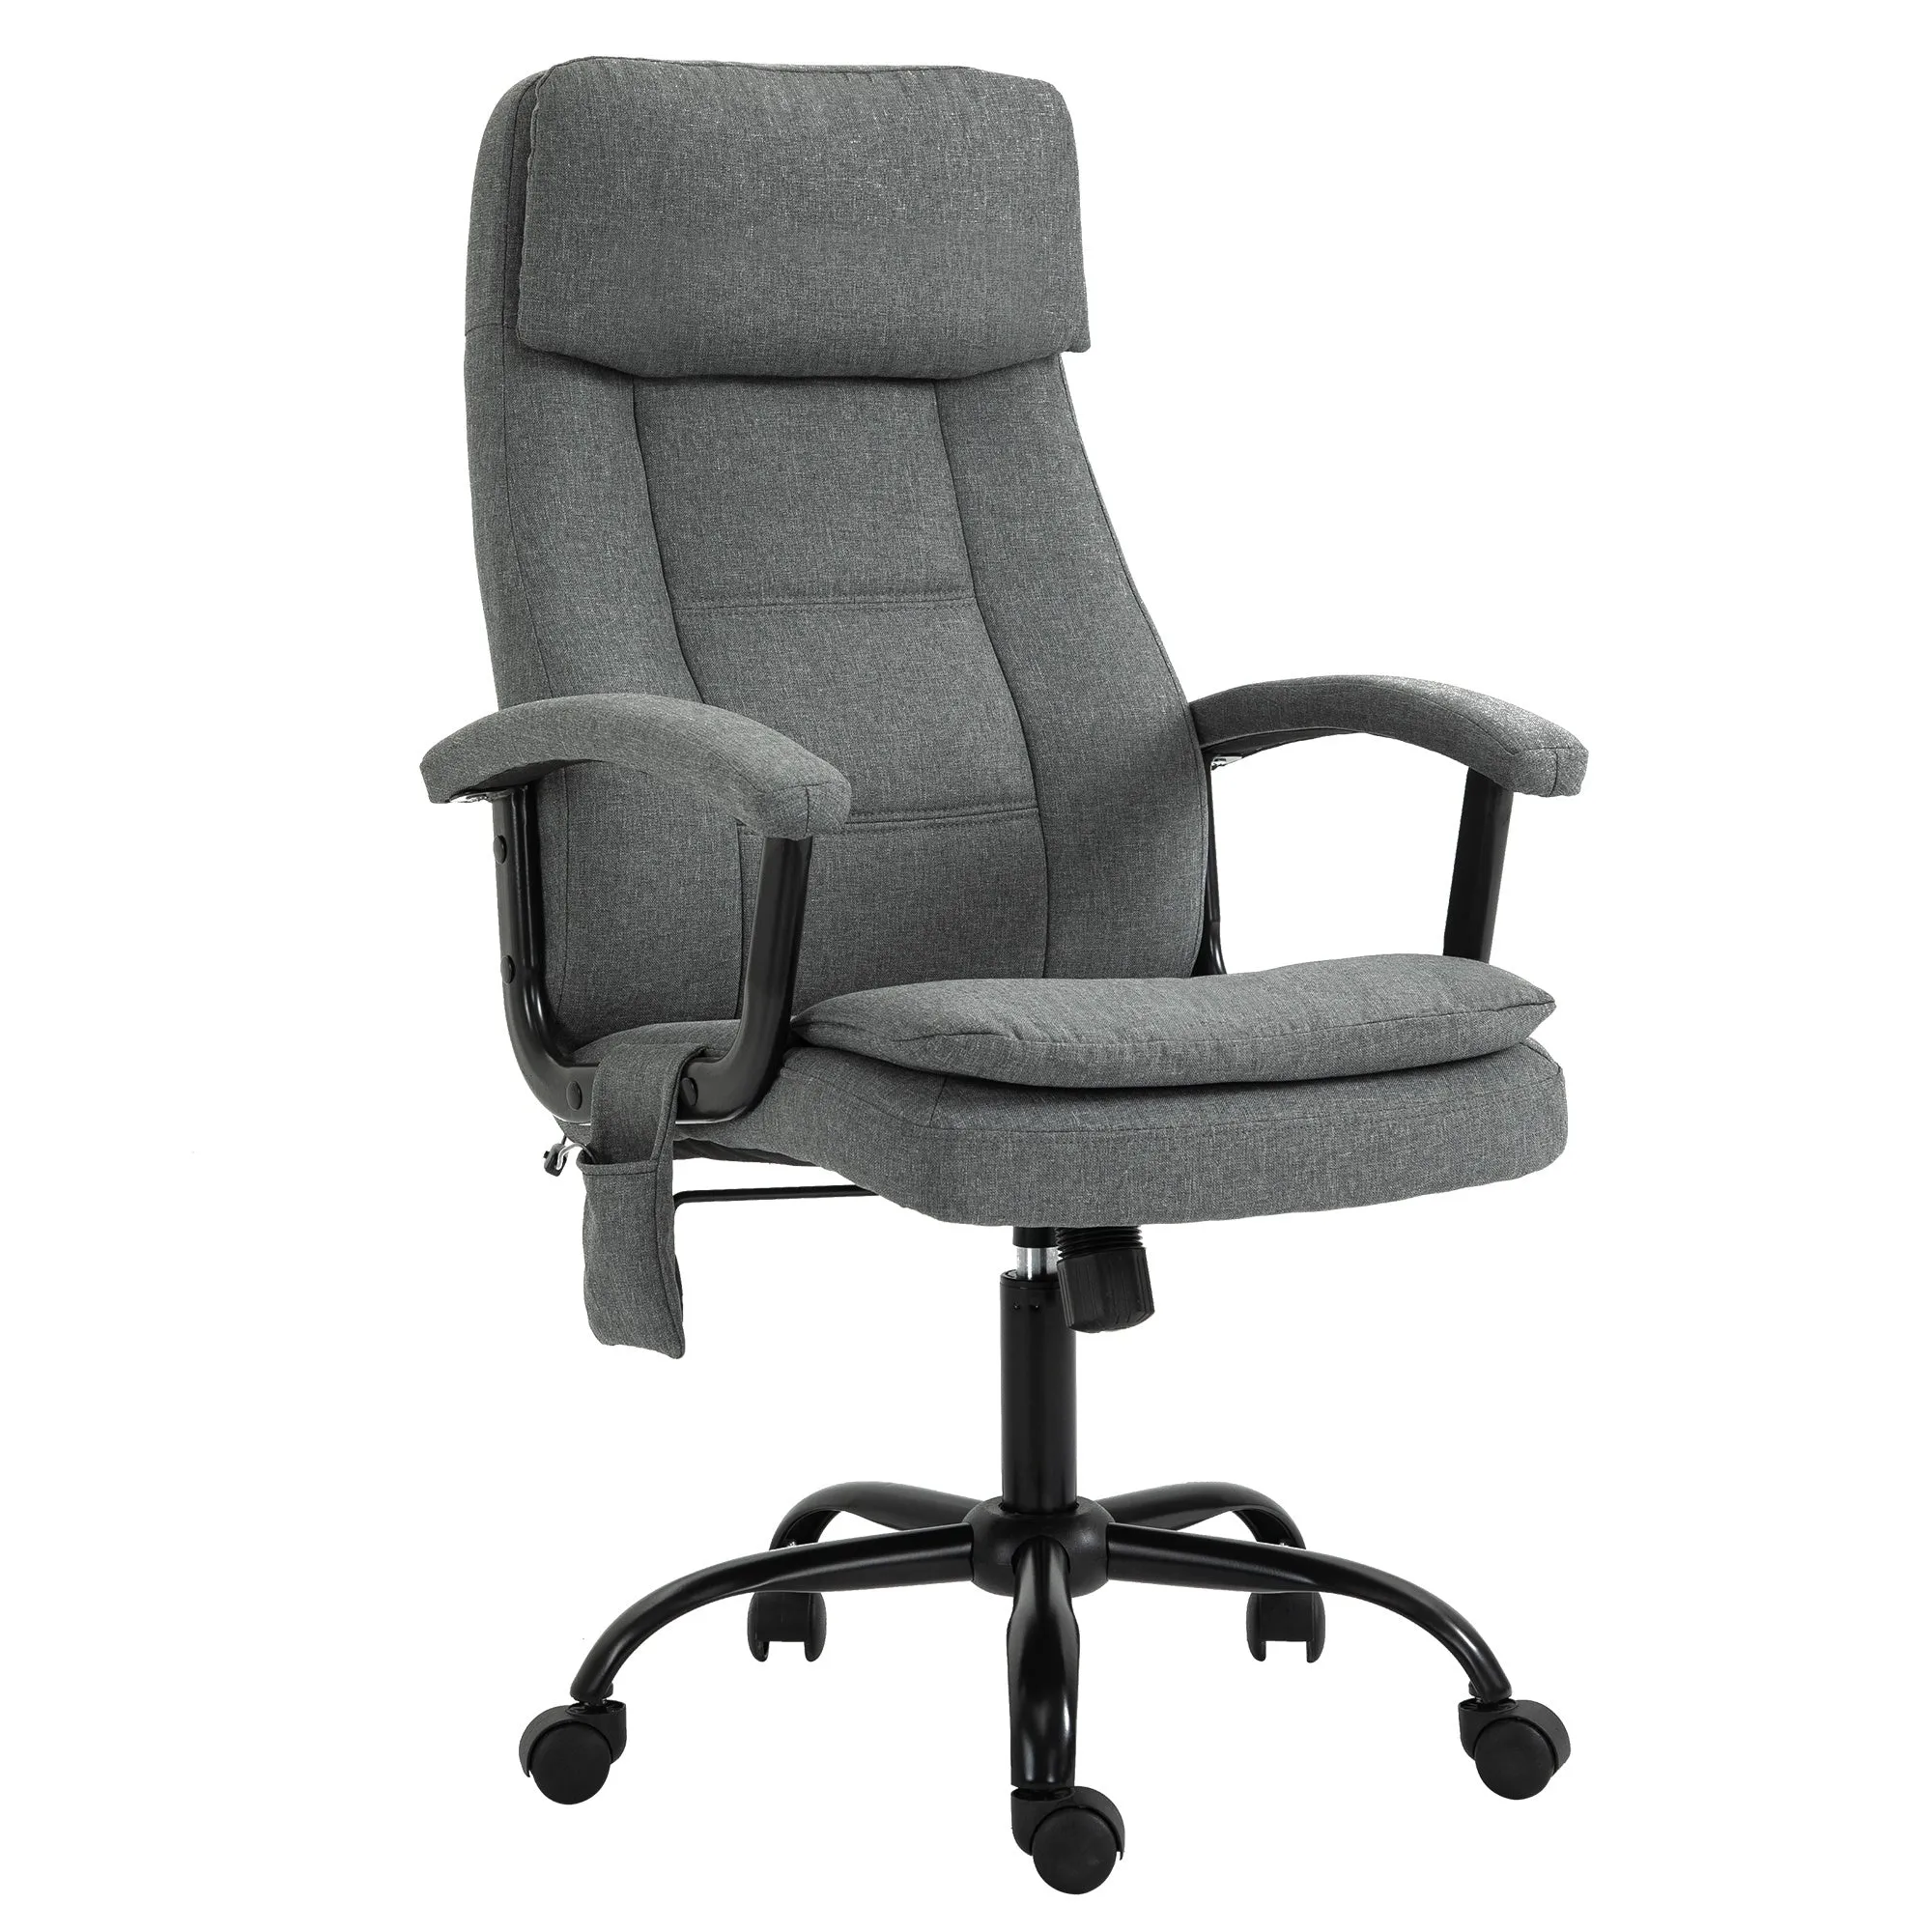 2-Point Vibrating Massage Office Chair High Back Executive Recliner with Reclining Back, Adjustable Height, Grey